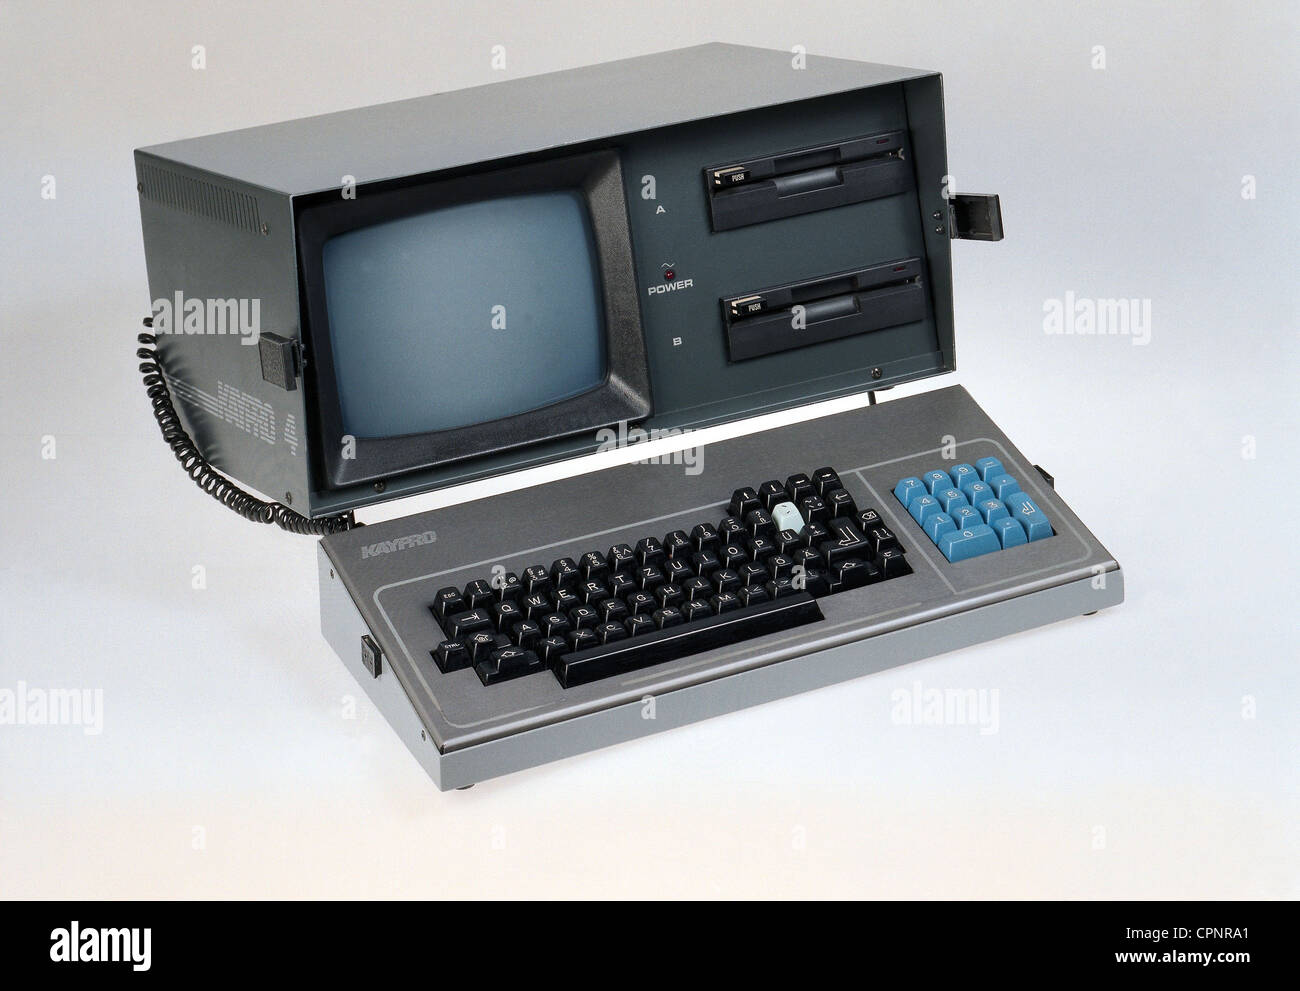 computing / electronics,computer,portable personal computer,Kaypro 4,one of the first portable computer,made by: Kaypro Corporation,USA,1983,portable,personal computer,laptop,laptop computer,laptops,laptop computers,Z80 / 8 bit microprocessor,operating system CP/M,working memory 64 kilobyte,integrated 9 inch monitor with diagonal of 23 centimeter,two 5.25 inch floppy disc drives,floppy disc station,Floppy Disc,keyboard as casing cover,metal housing,weight circa 15 kilogram,original price 1984 in Germany: DM 6.898.-,history of computer,,Additional-Rights-Clearences-Not Available Stock Photo